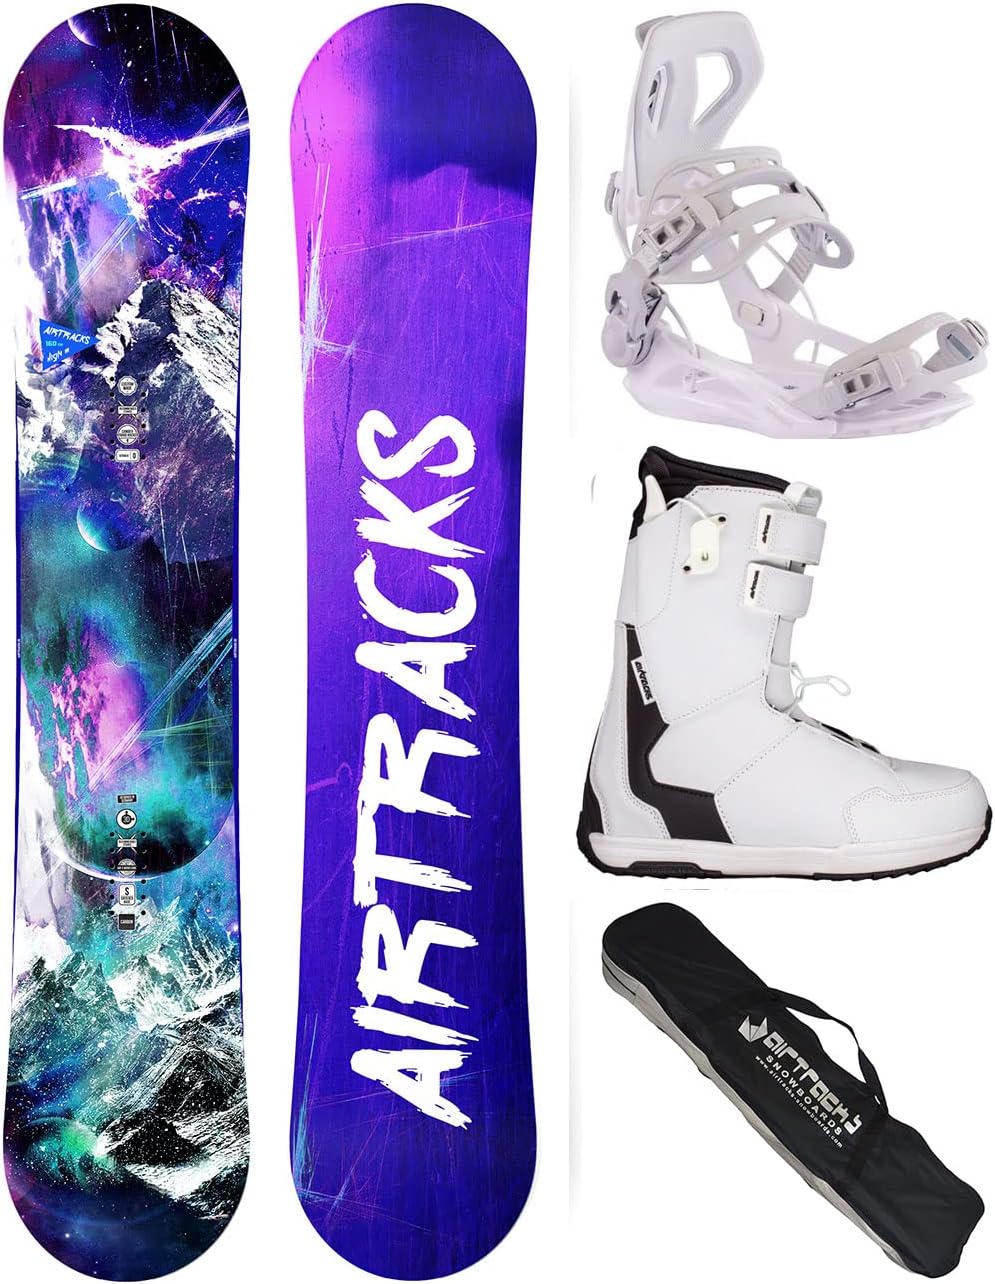 AIRTRACKS Snowboard Set Pack Planche High M Hybrid Rocker + Fixations Master W + Chaussures + SB Sac 140 145 150 155 cm - fitnessterapy